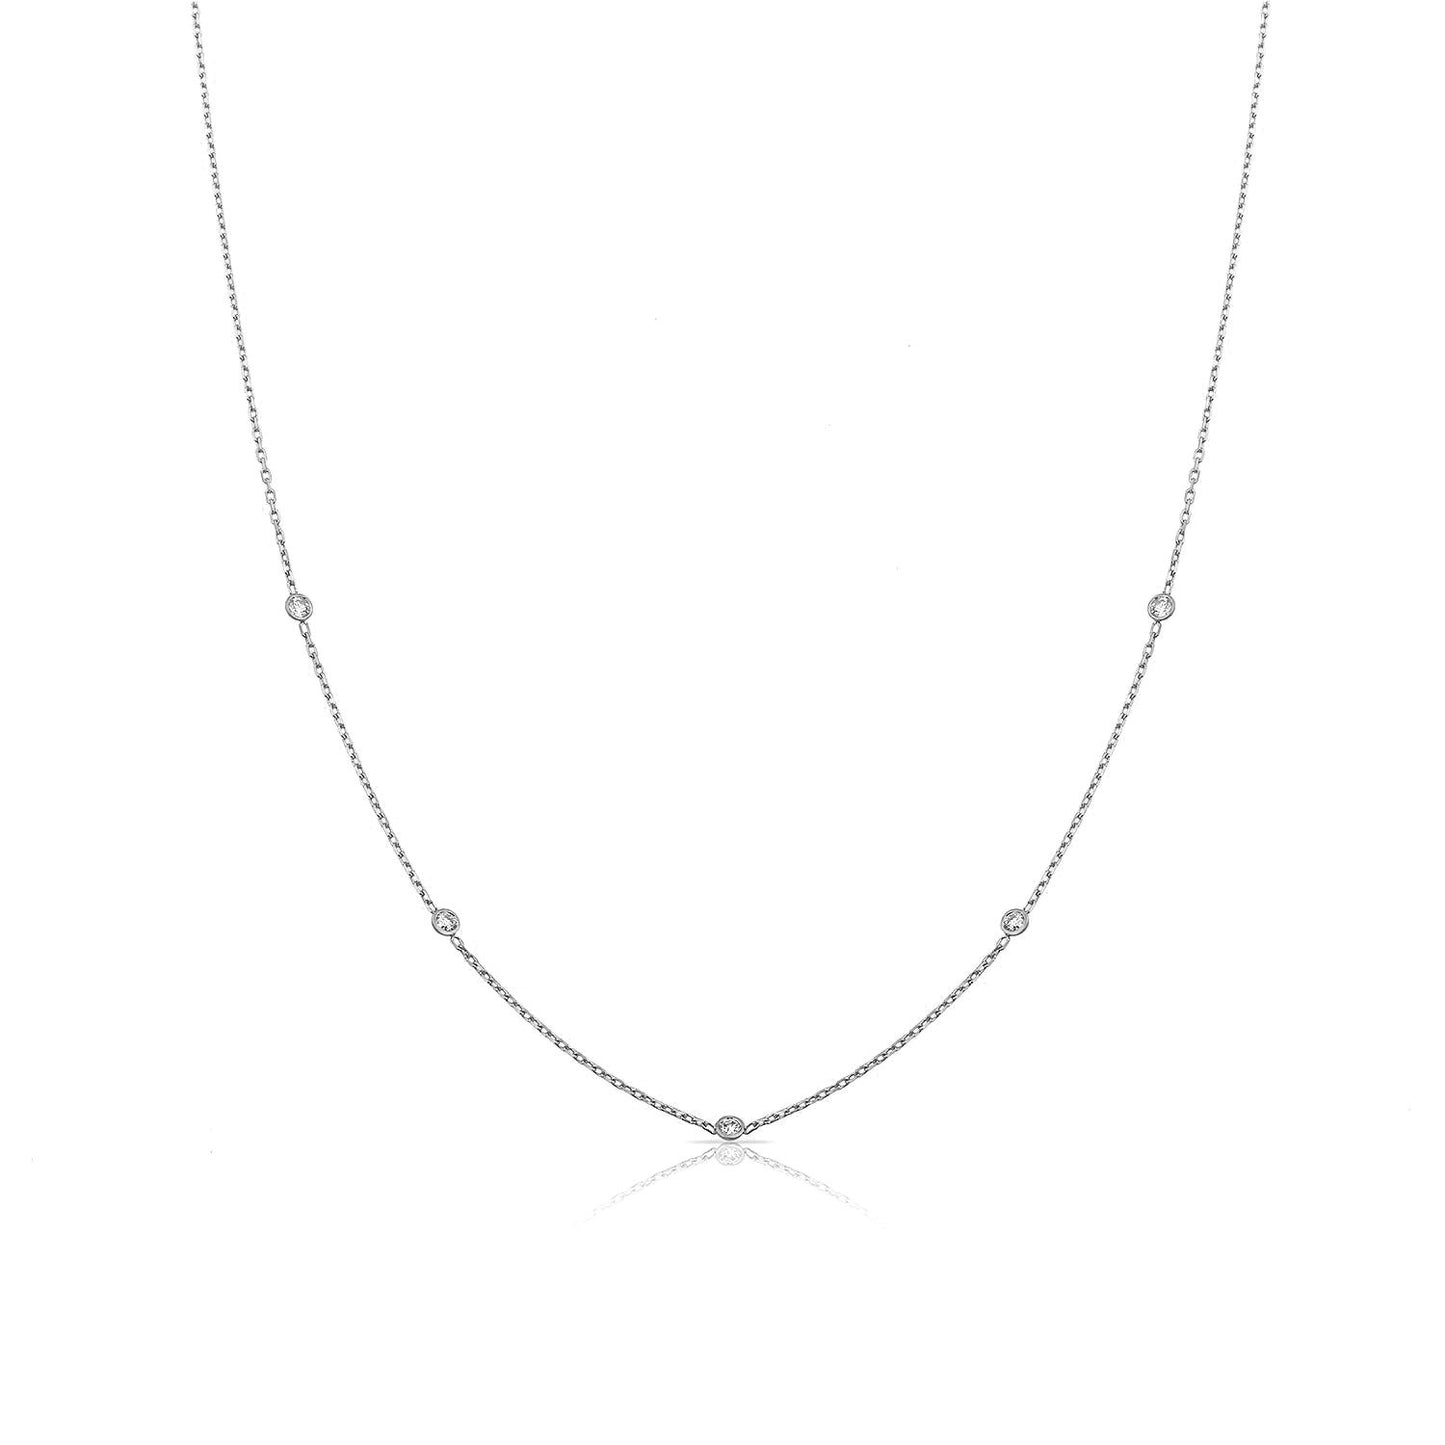 Loverly Crystal Dotted Necklace JEWELRY The Sis Kiss Silver